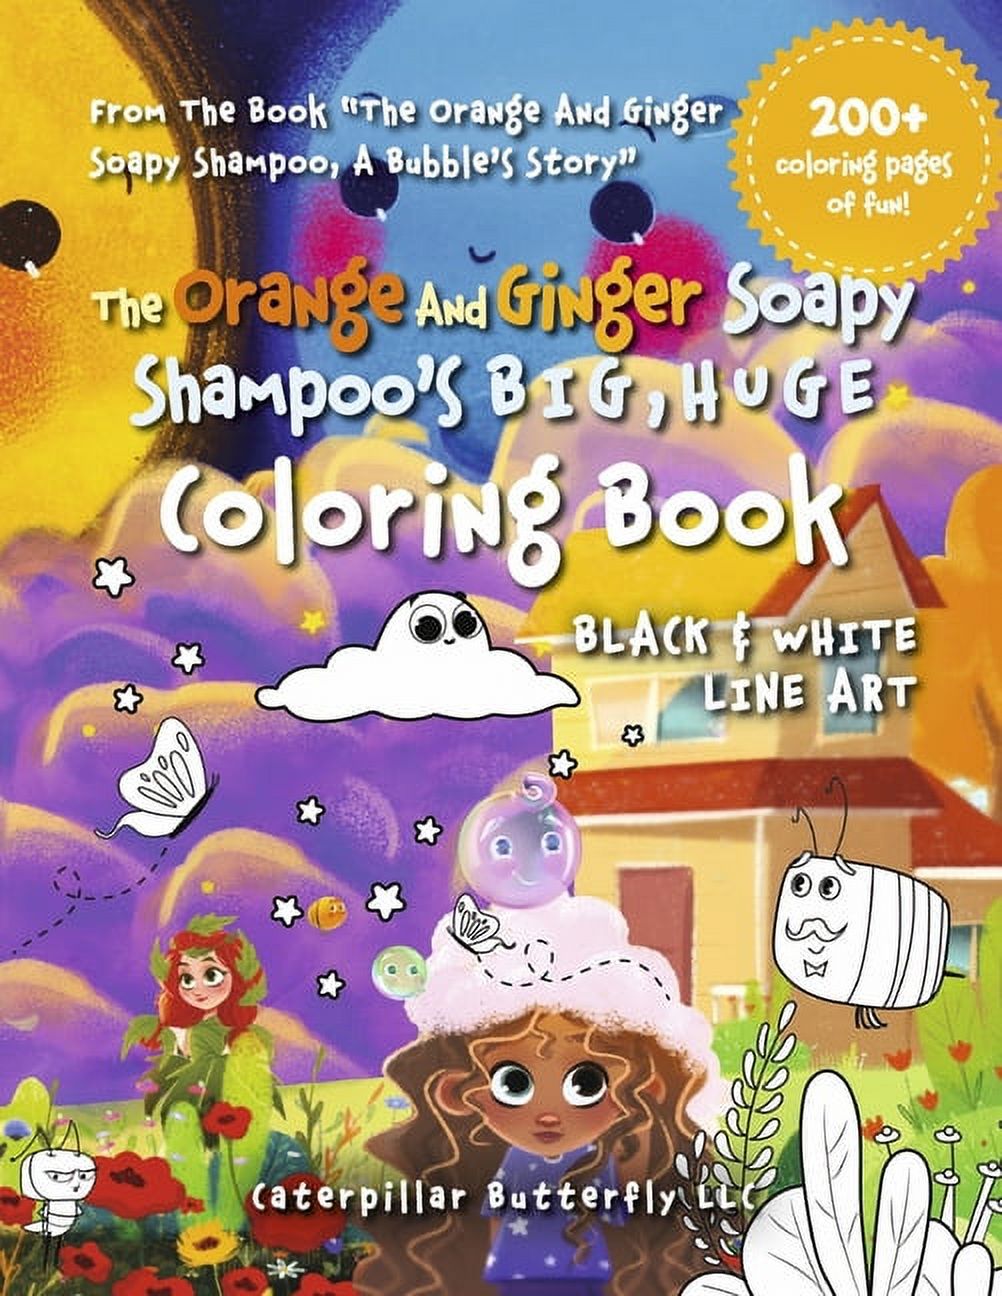 Big,　Book　Soapy　The　Ginger　Coloring　Huge　Orange　Shampoo's　and　(Paperback)